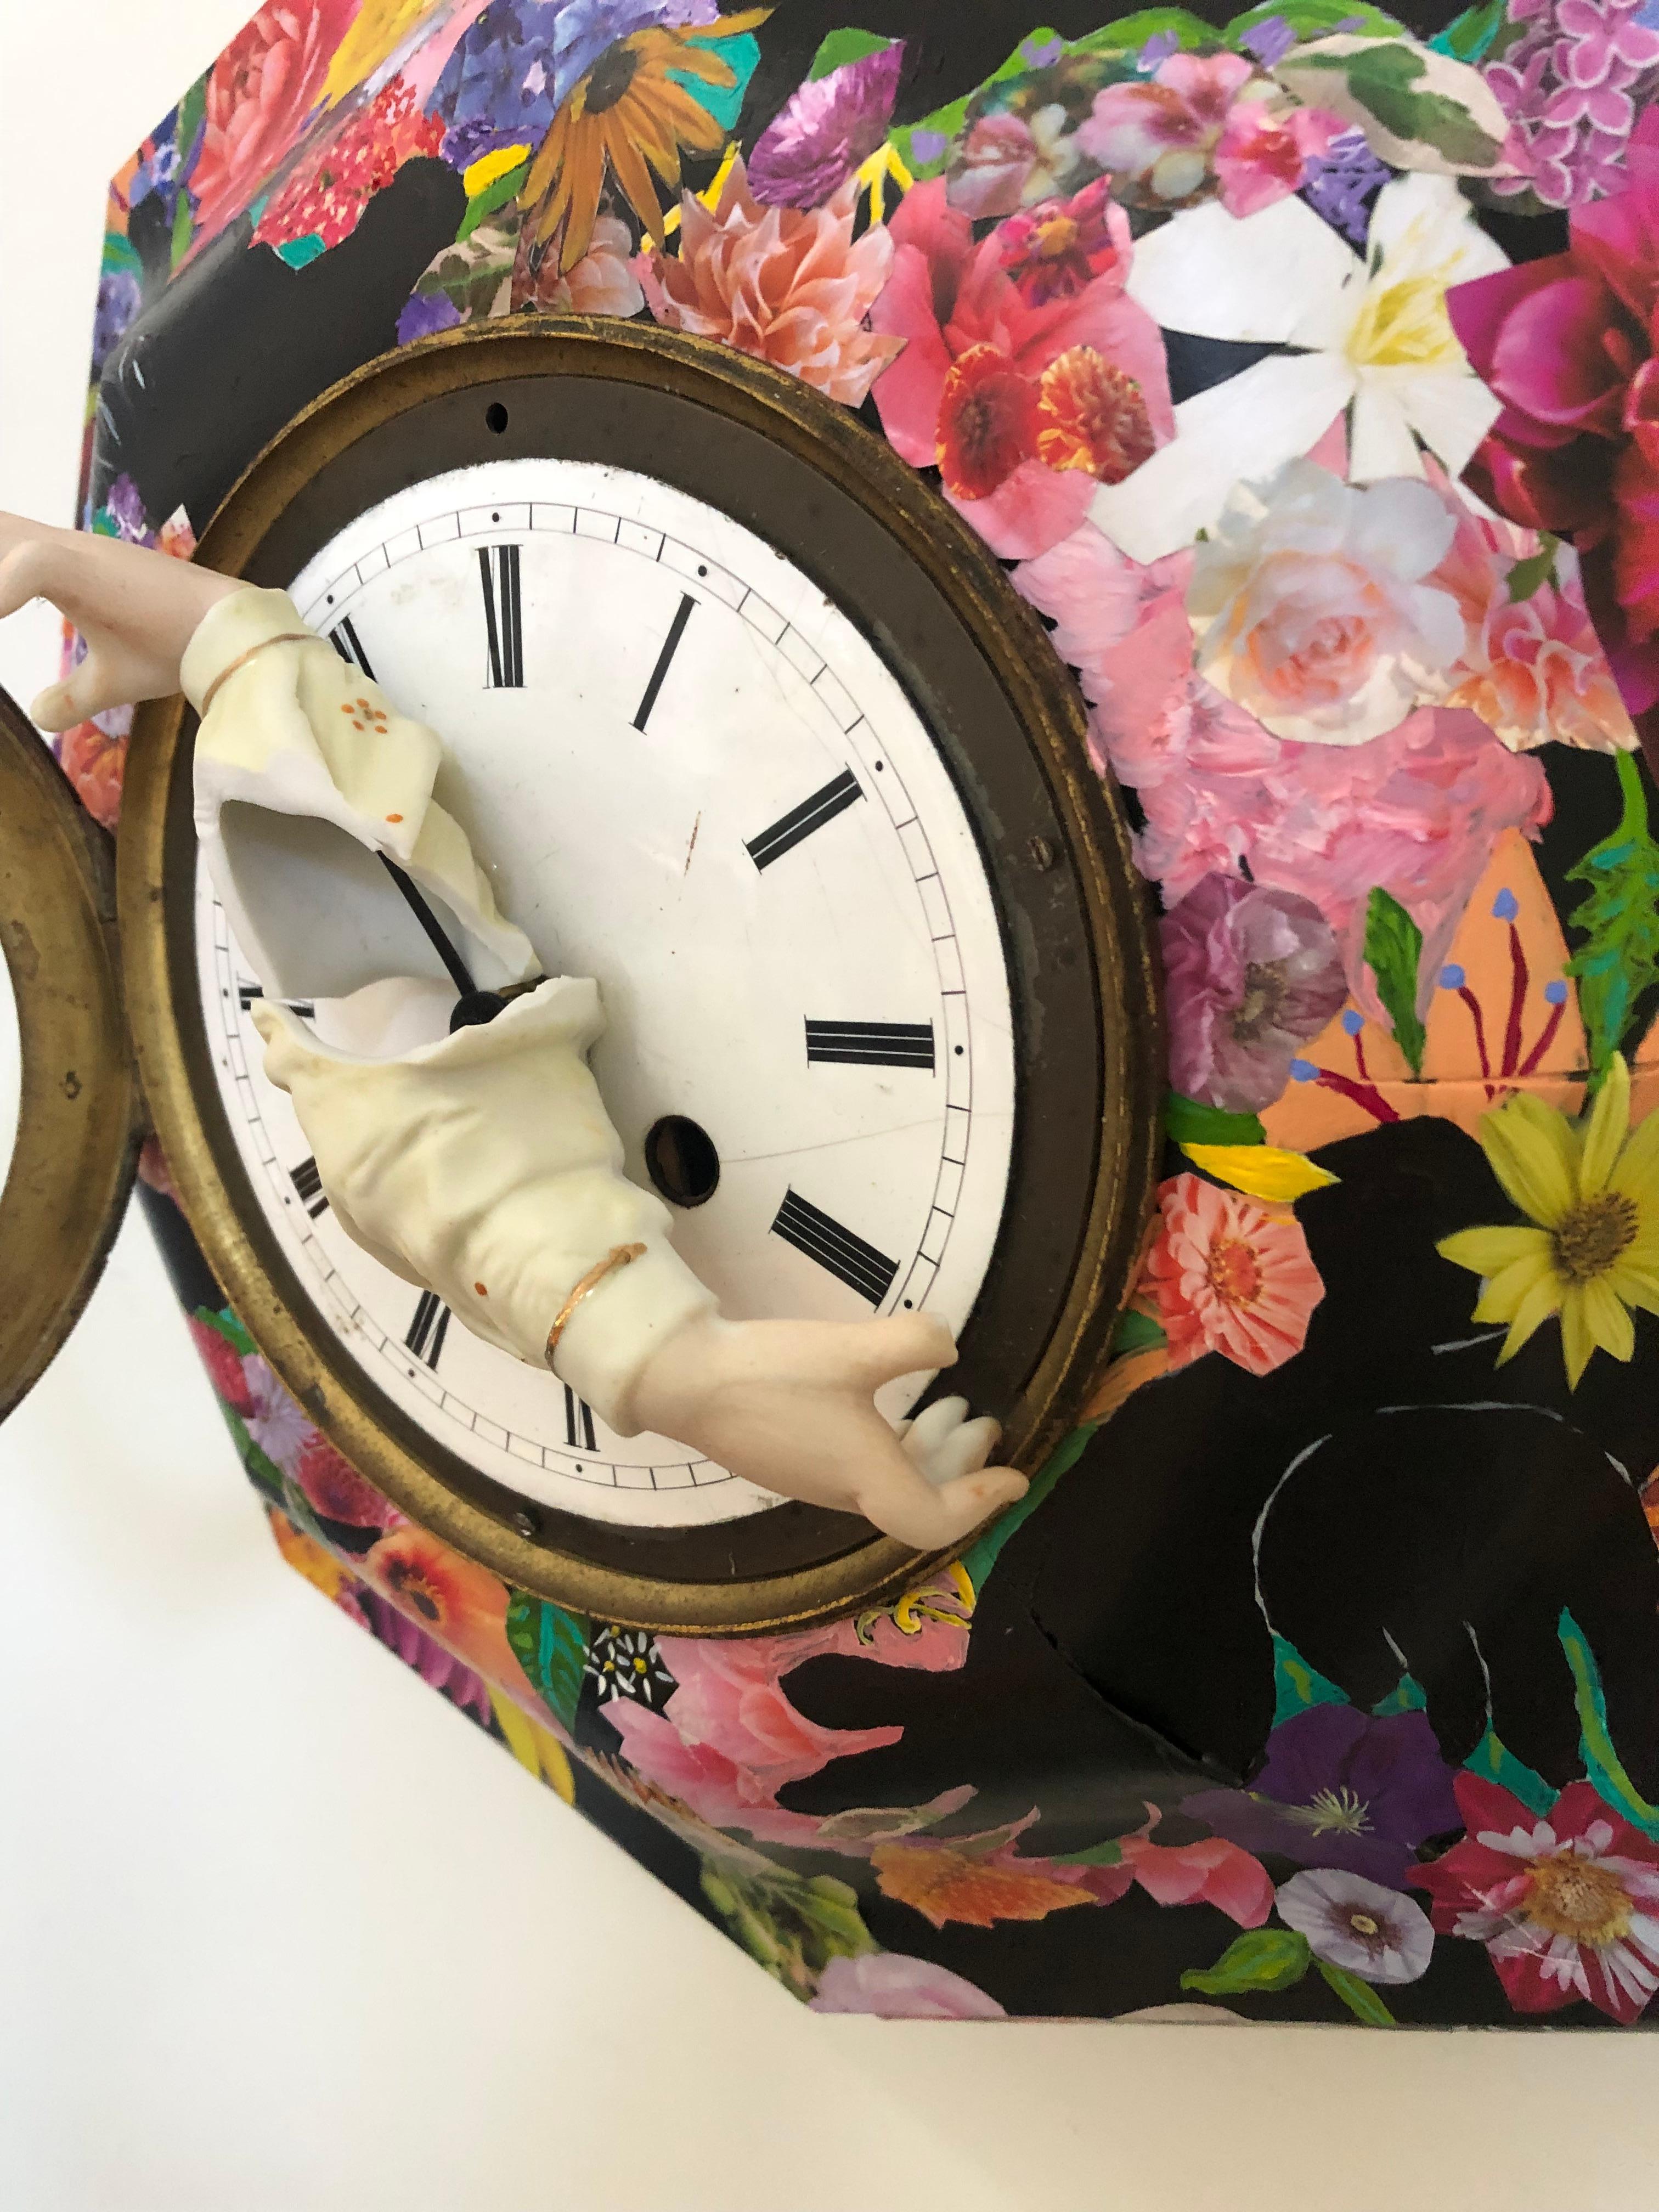 Eye catching and imaginative mixed media wall sculpture having a black antique clock that's collaged and painted with flowers and 4 unpainted areas in the shape of blackbirds that surround the white clock face. The hands on the face are actual